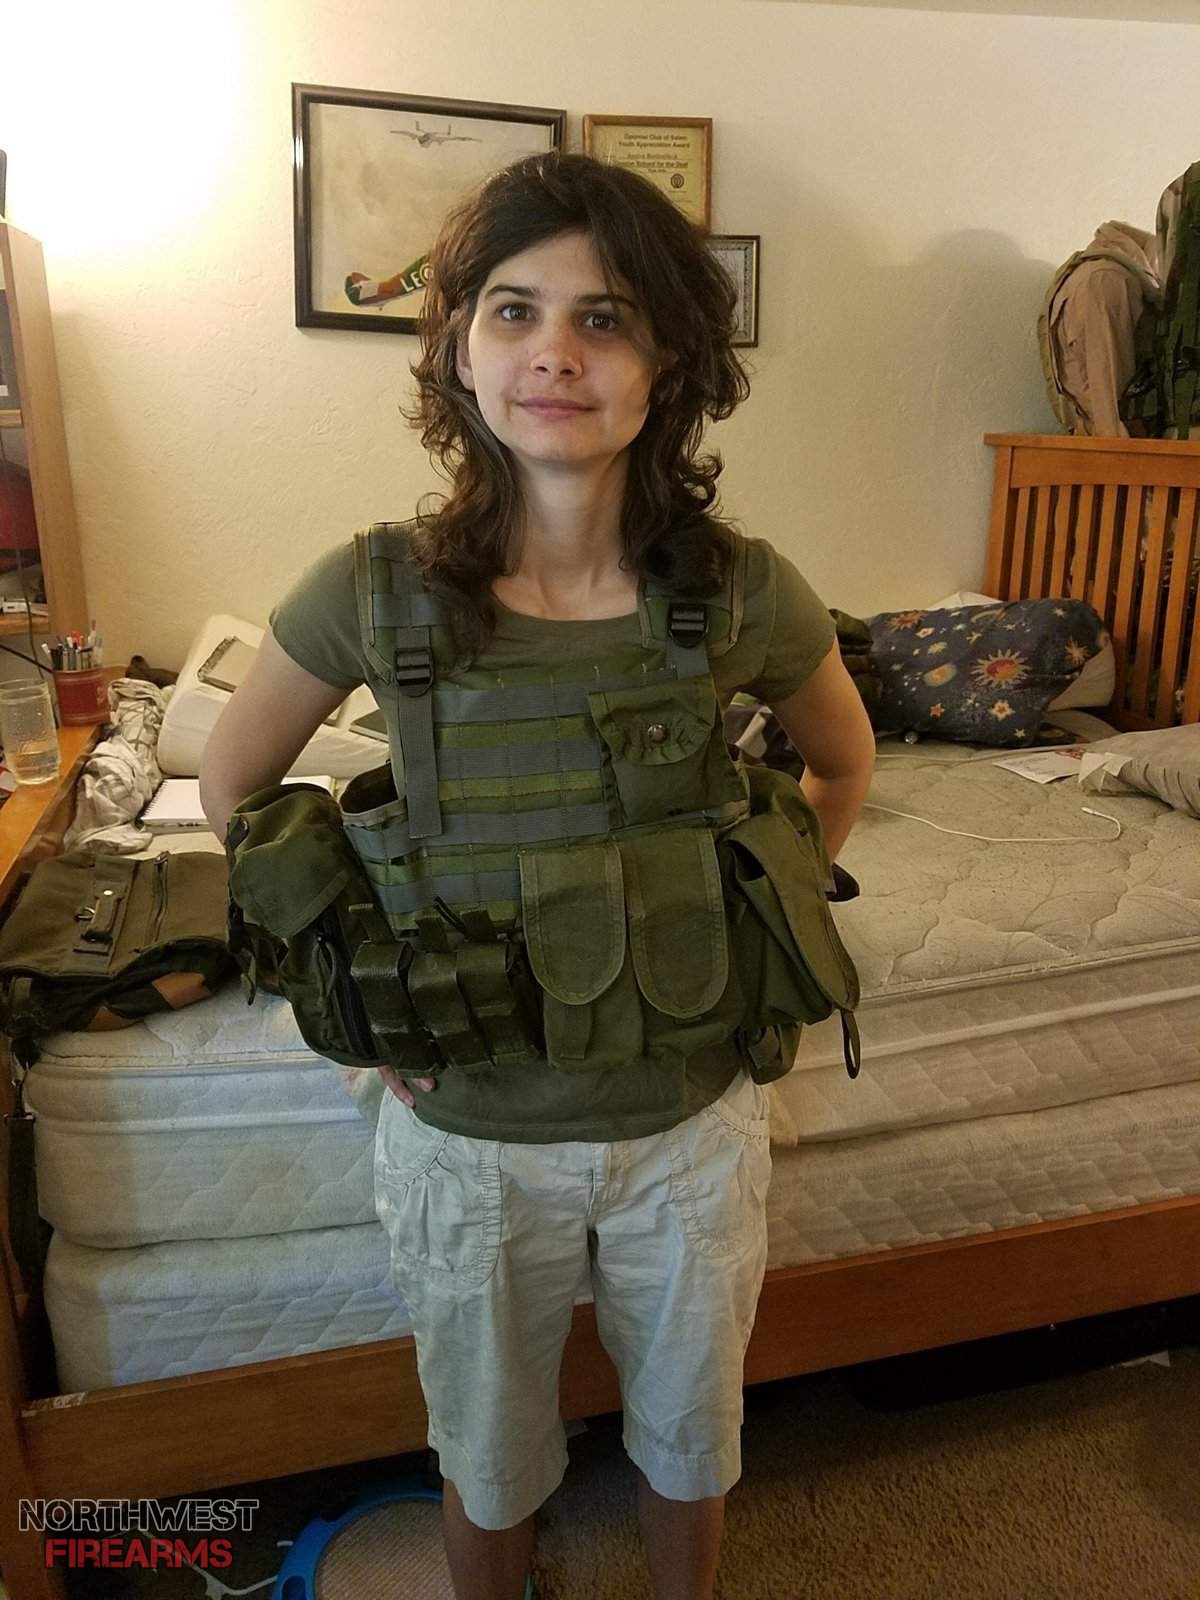 For those asking me about my chest rig set up from previous posts